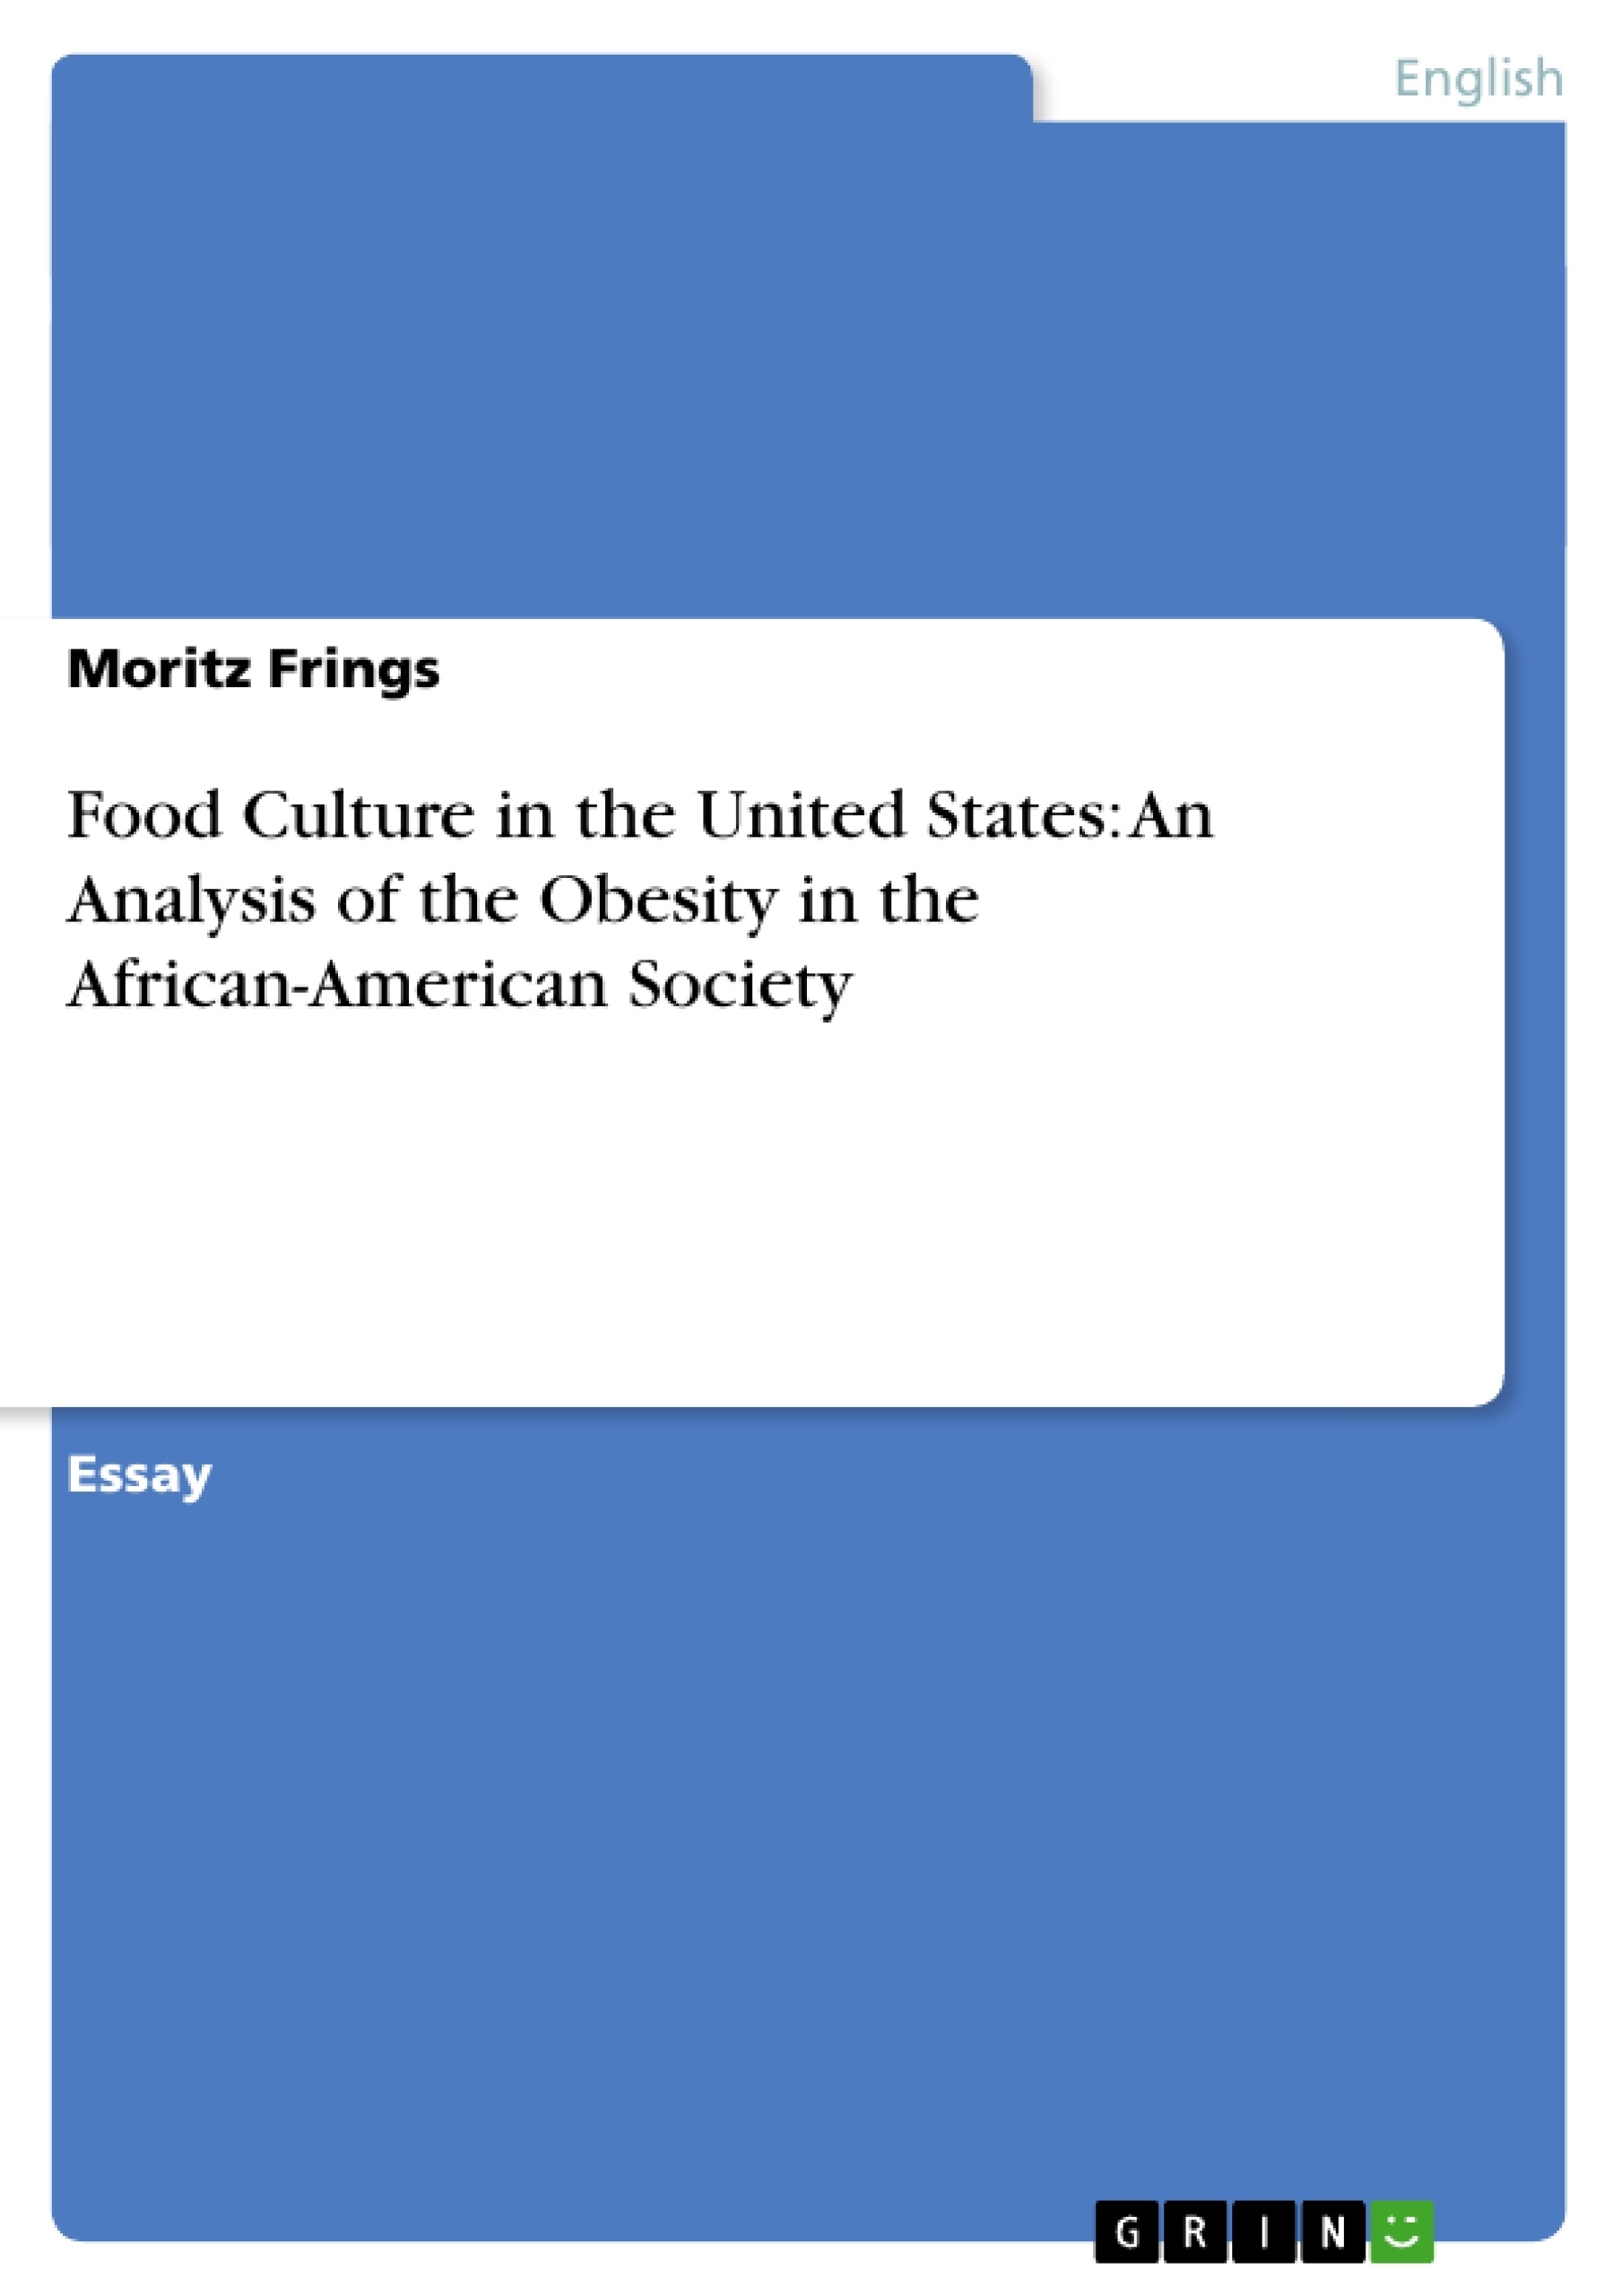 Title: Food Culture in the United States: An Analysis of the Obesity in the African-American Society